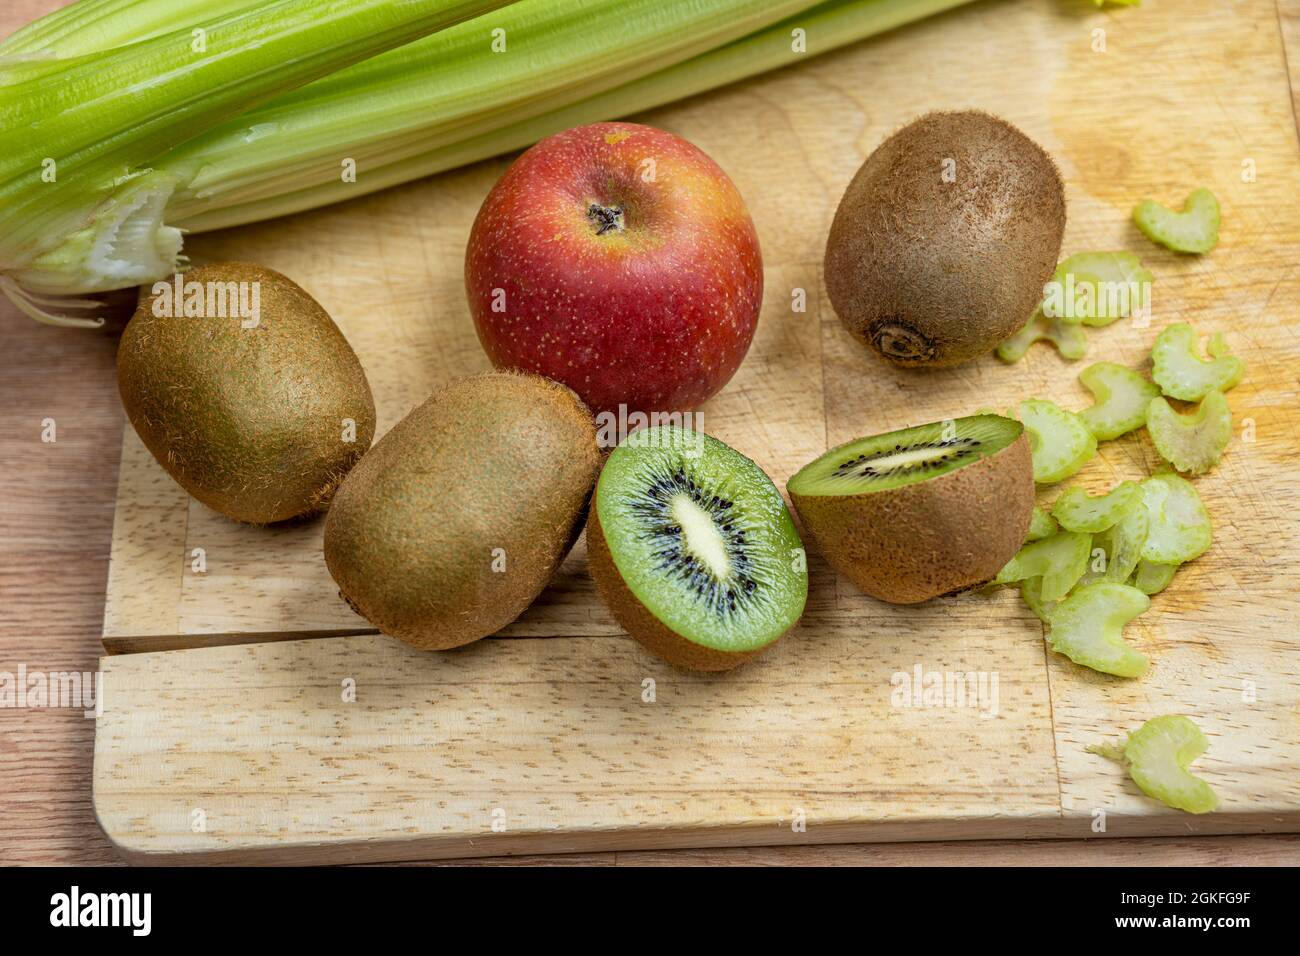 Ripe kiwis, apples and celery cut to prepare a healthy detox juice Stock Photo